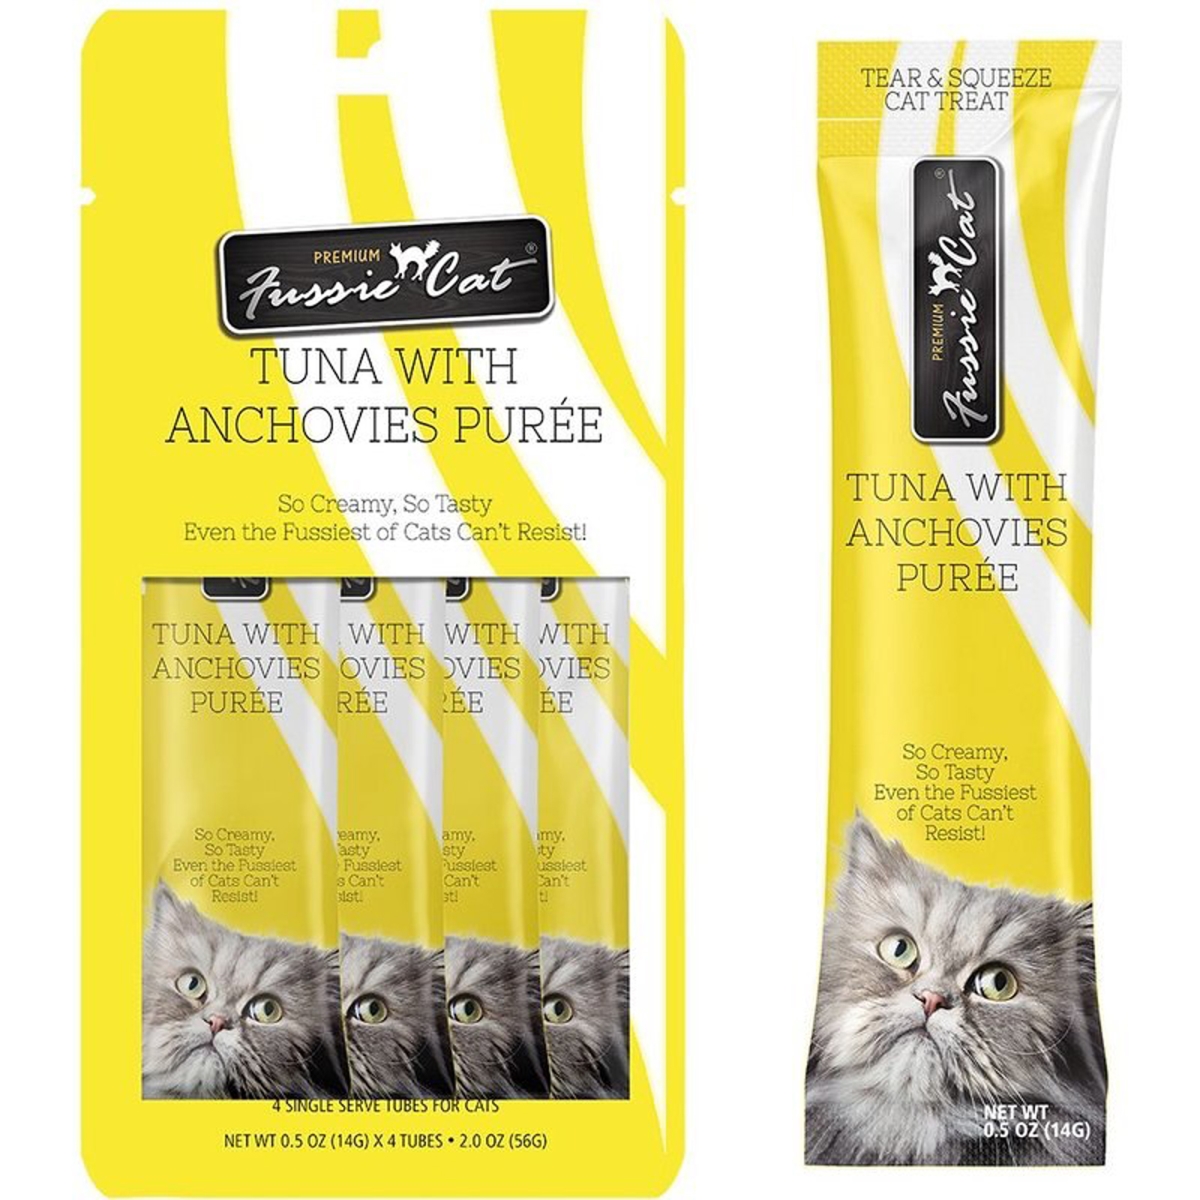 Picture of Fussie Cat 888641138951 2 oz Tuna Cat Treat with Anchovies Puree - 18 Count